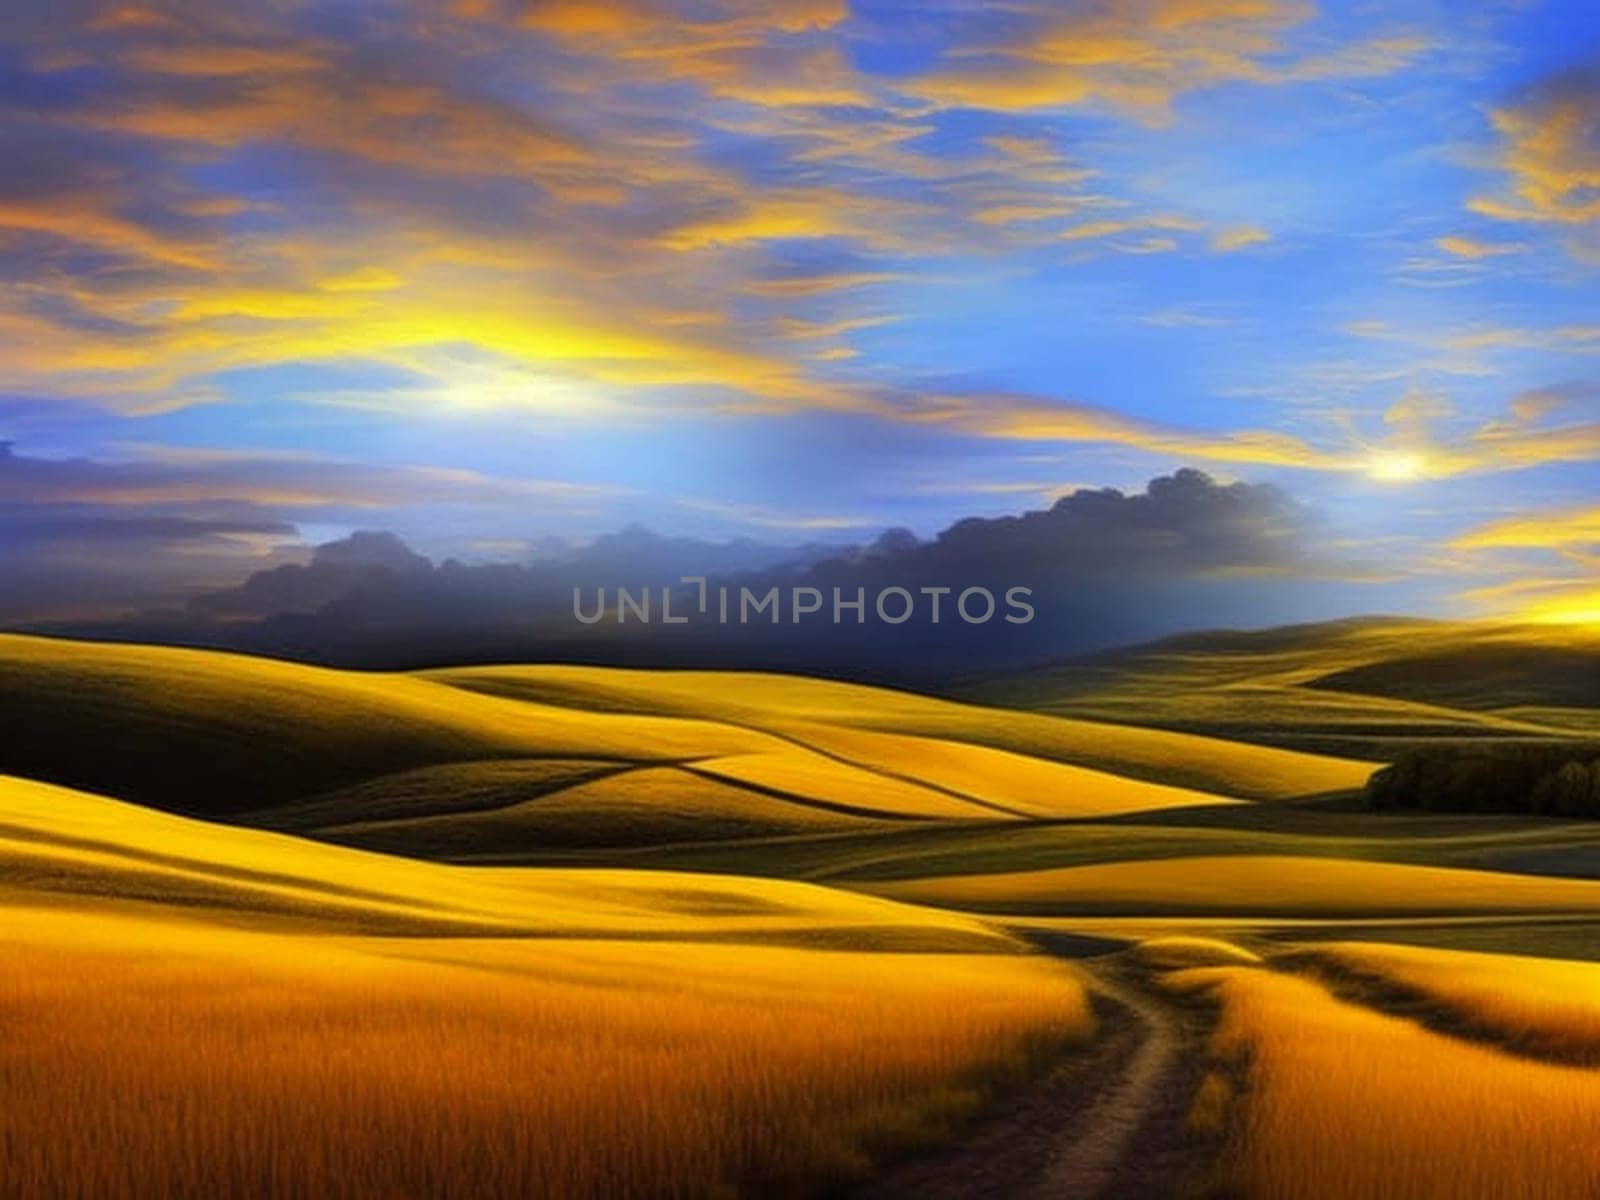 Witness a breathtaking image of the Tuscan countryside as the first rays of golden light cascade over the undulating hills, illuminating the picturesque landscape. This stunning photograph, AI generated, captures a mesmerizing sunrise that paints the sky with warm hues, casting a captivating glow on the serene fields and charming farmhouse below. Every detail has been expertly composed by an AI, creating a captivating visual symphony of nature's beauty.